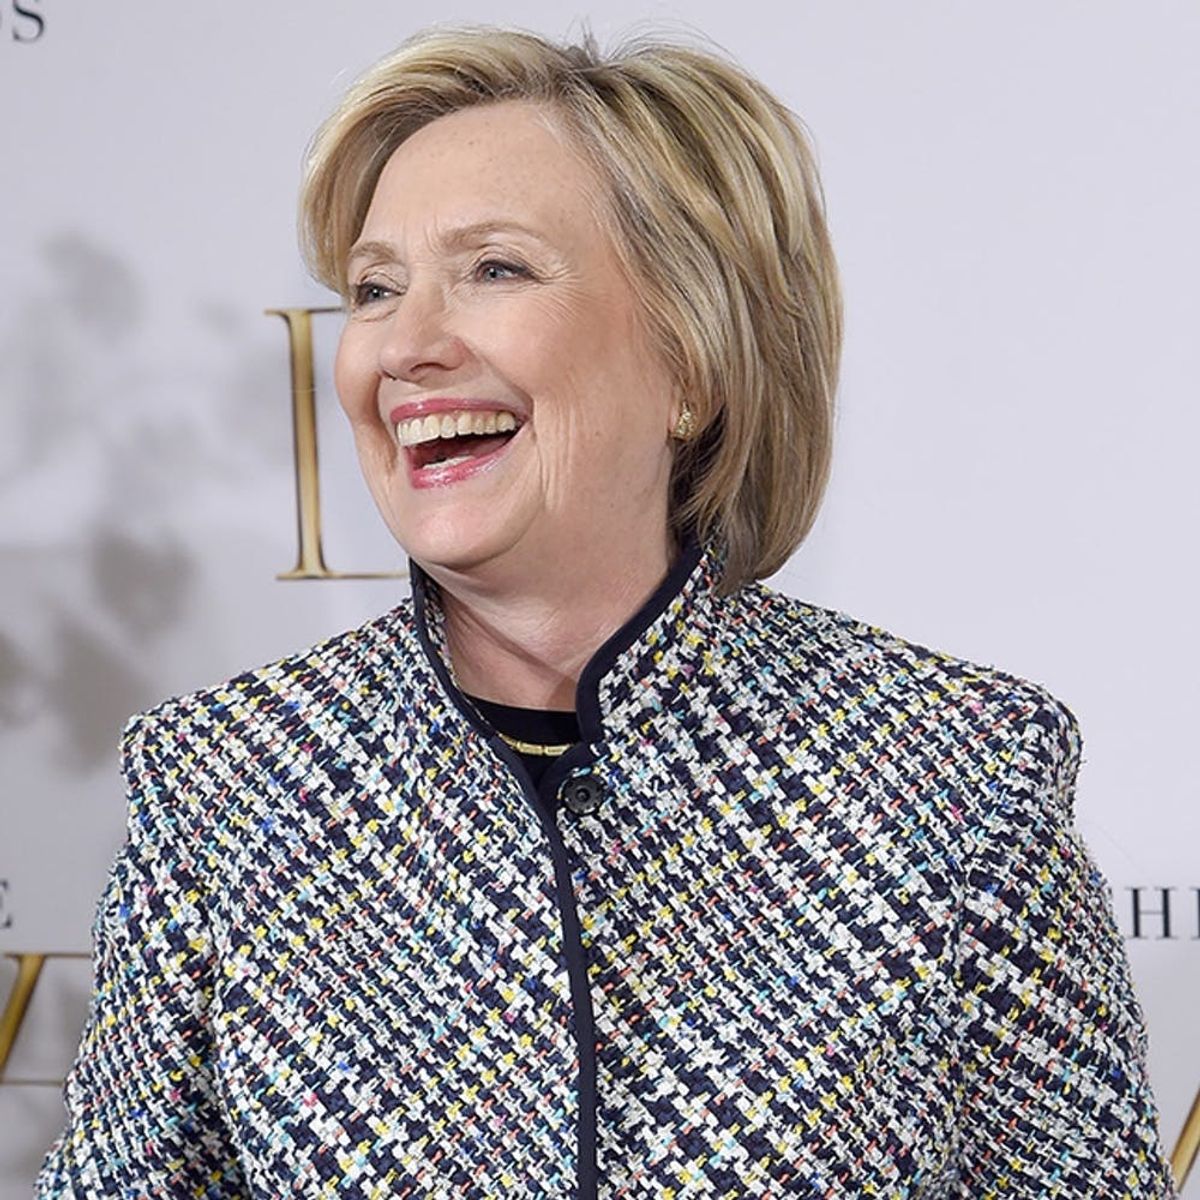 Hillary Clinton Just Joined Instagram + Her First Pic Will Make You LOL